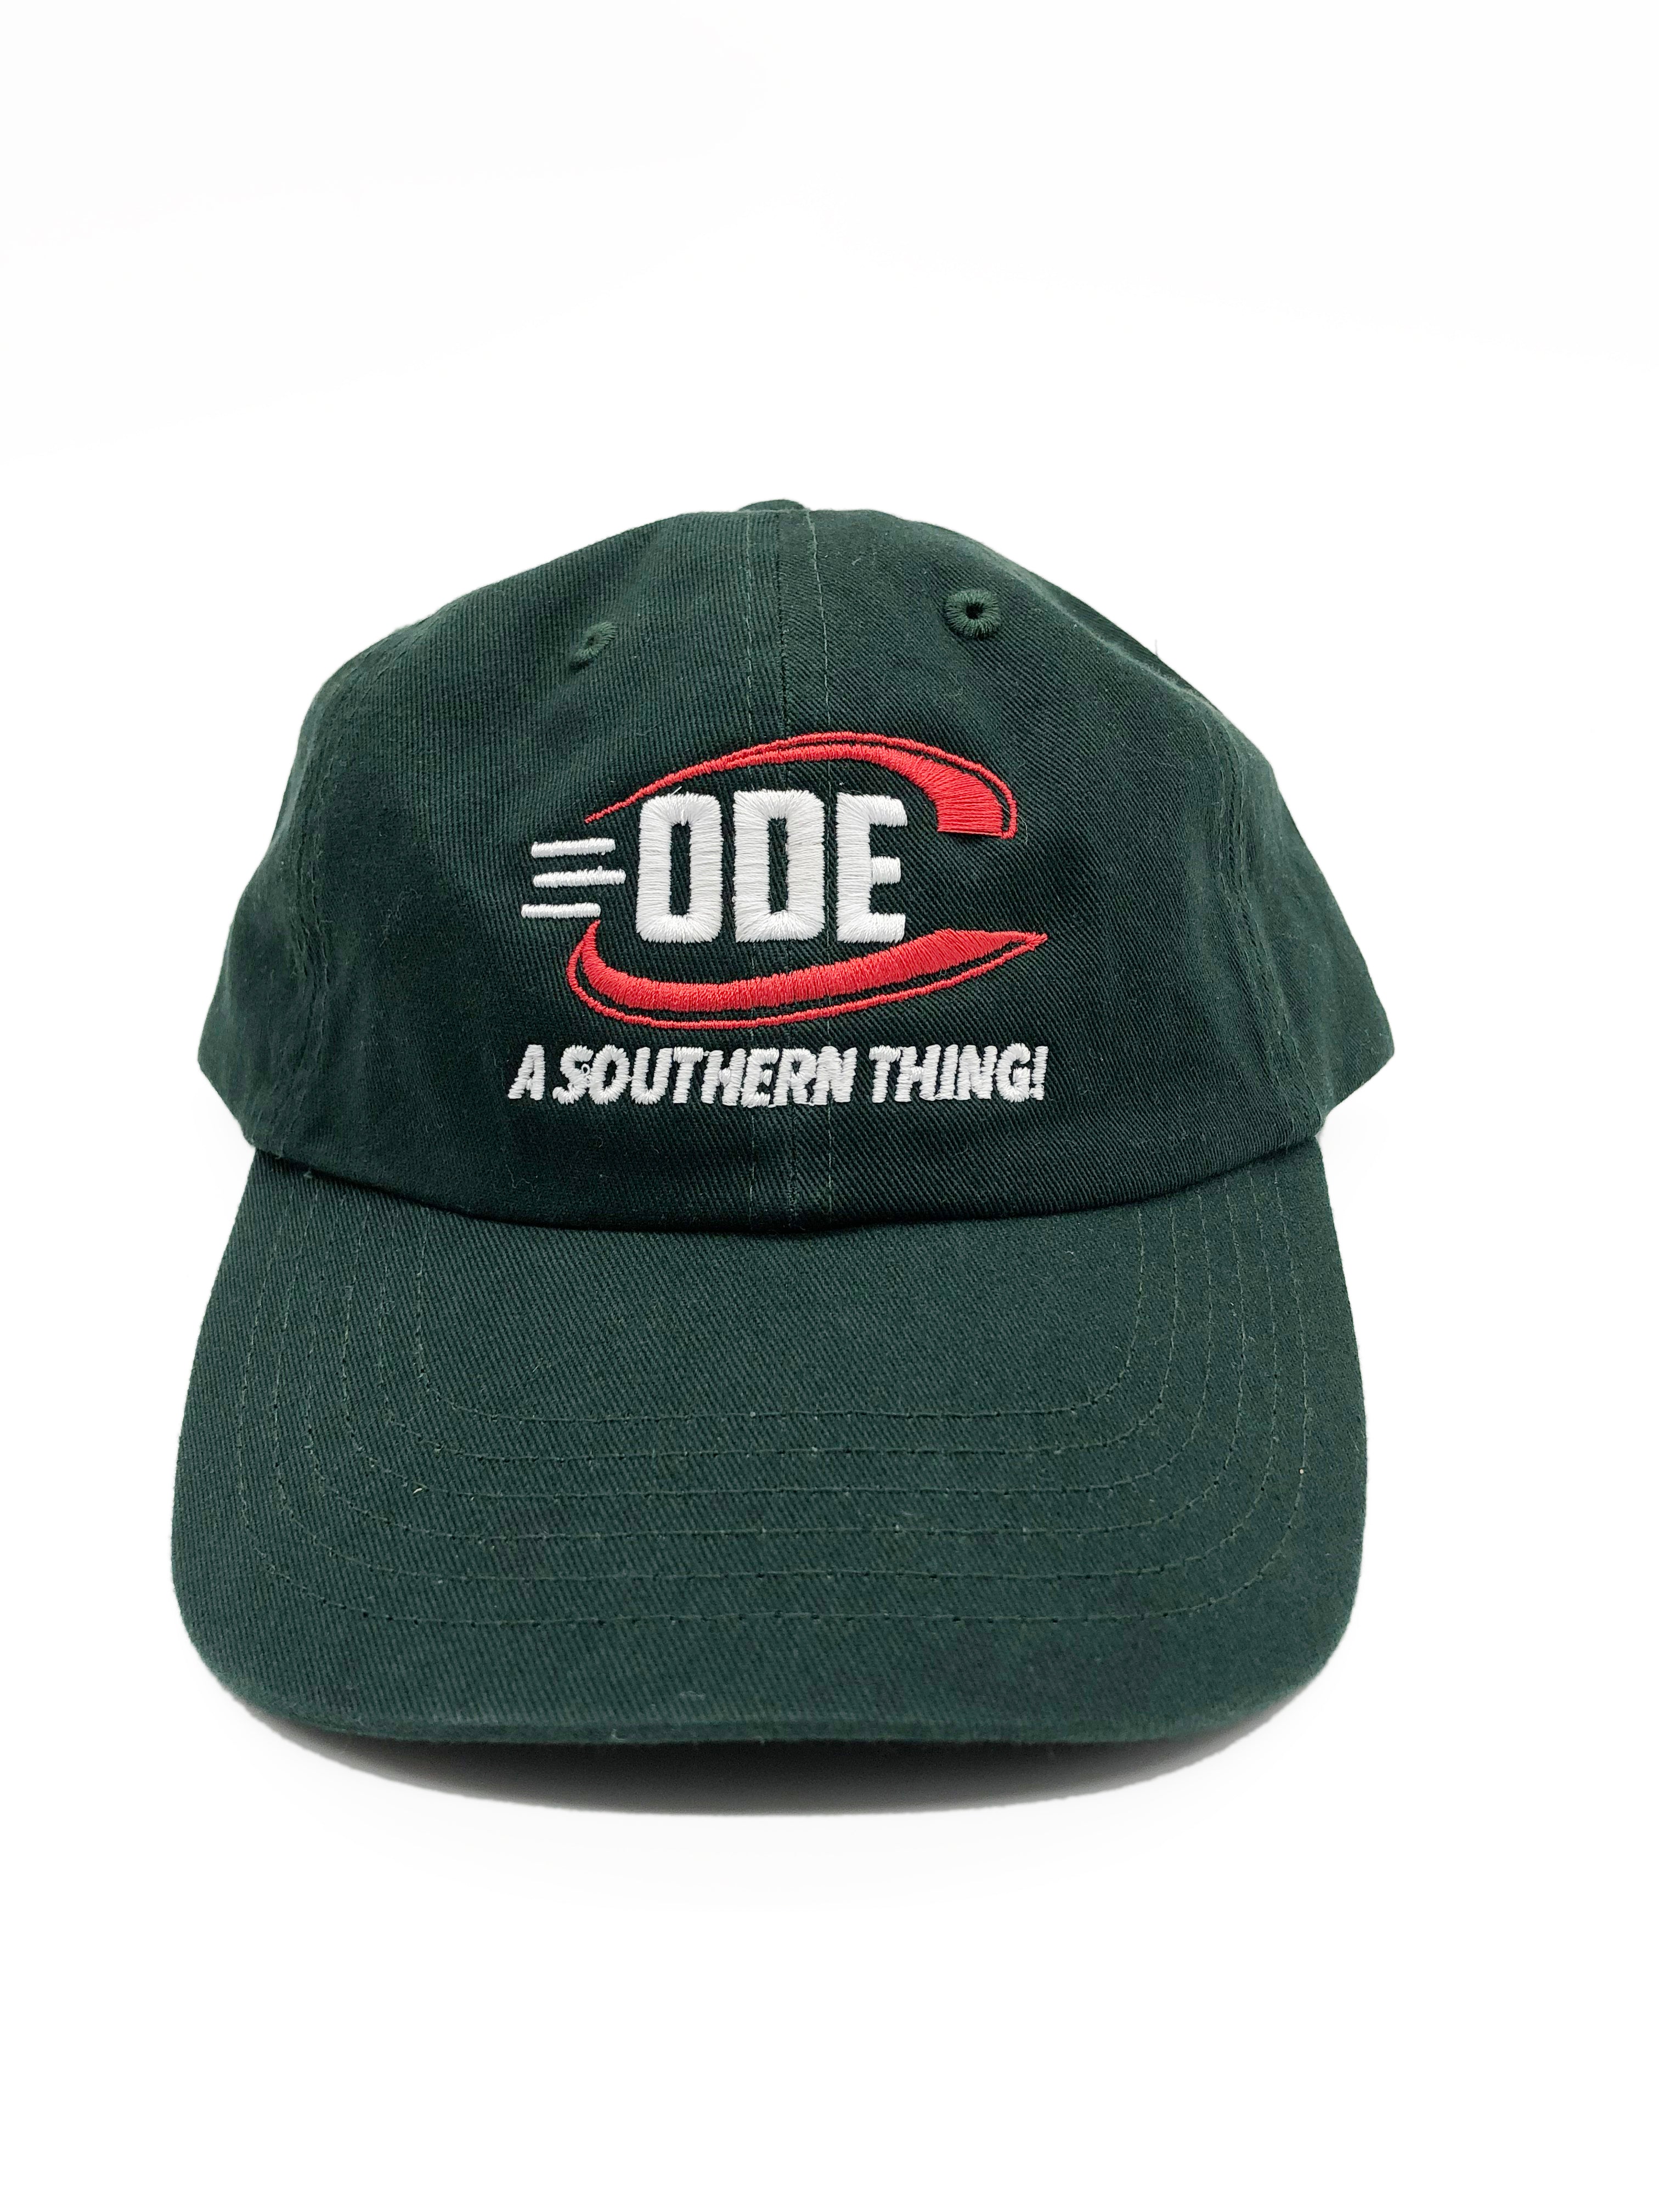 The Ode "A Southern Thing" Dad Hat-Green